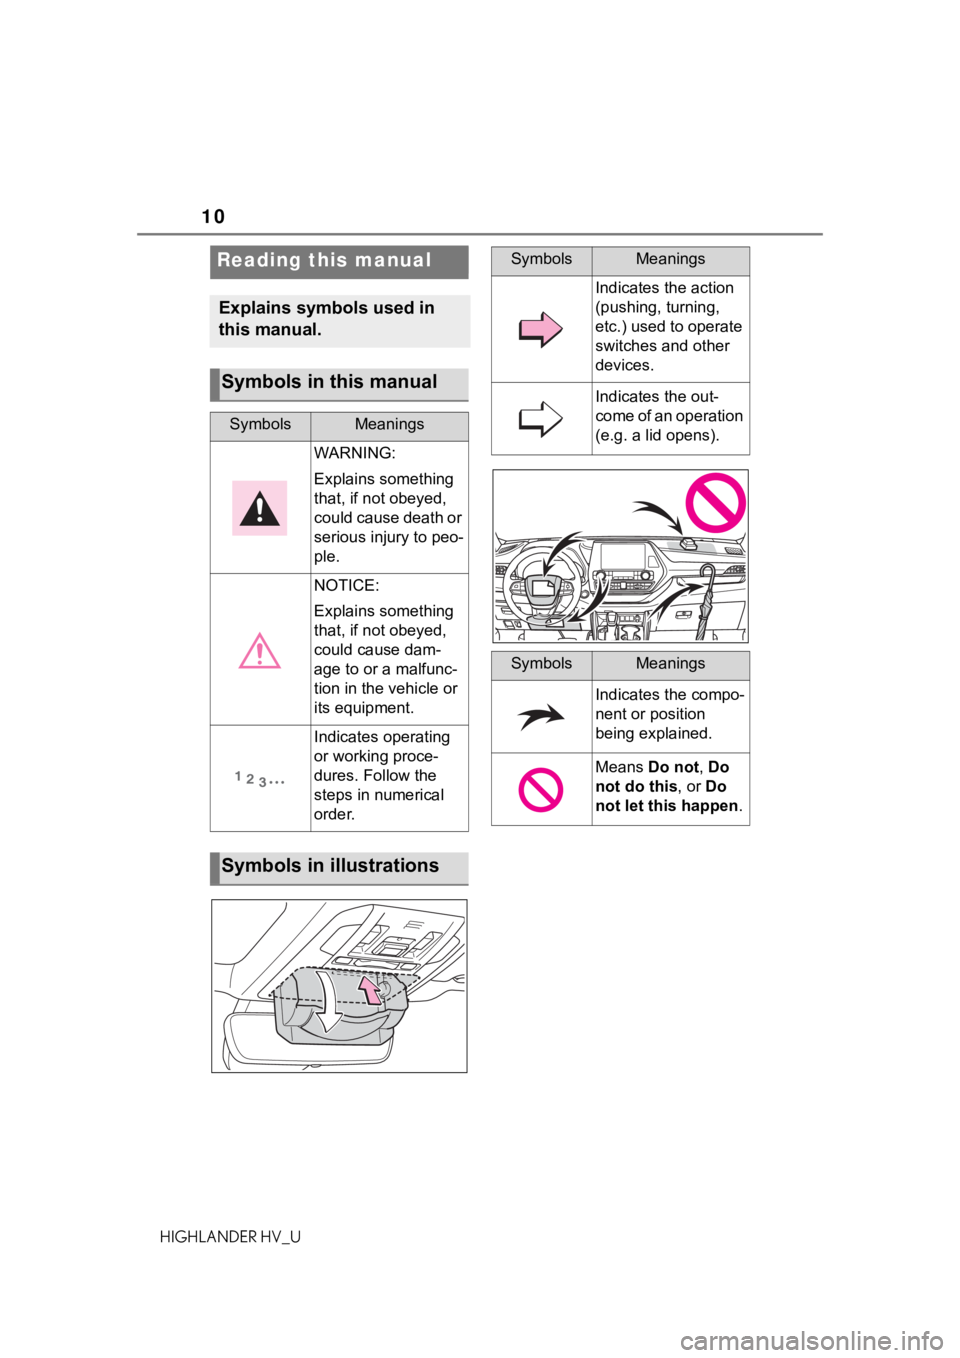 TOYOTA HIGHLANDER HYBRID 2021  Owners Manual (in English) 10
HIGHLANDER HV_U
Reading this manual
Explains symbols used in 
this manual.
Symbols in this manual
SymbolsMeanings
WARNING:
Explains something 
that, if not obeyed, 
could cause death or 
serious in